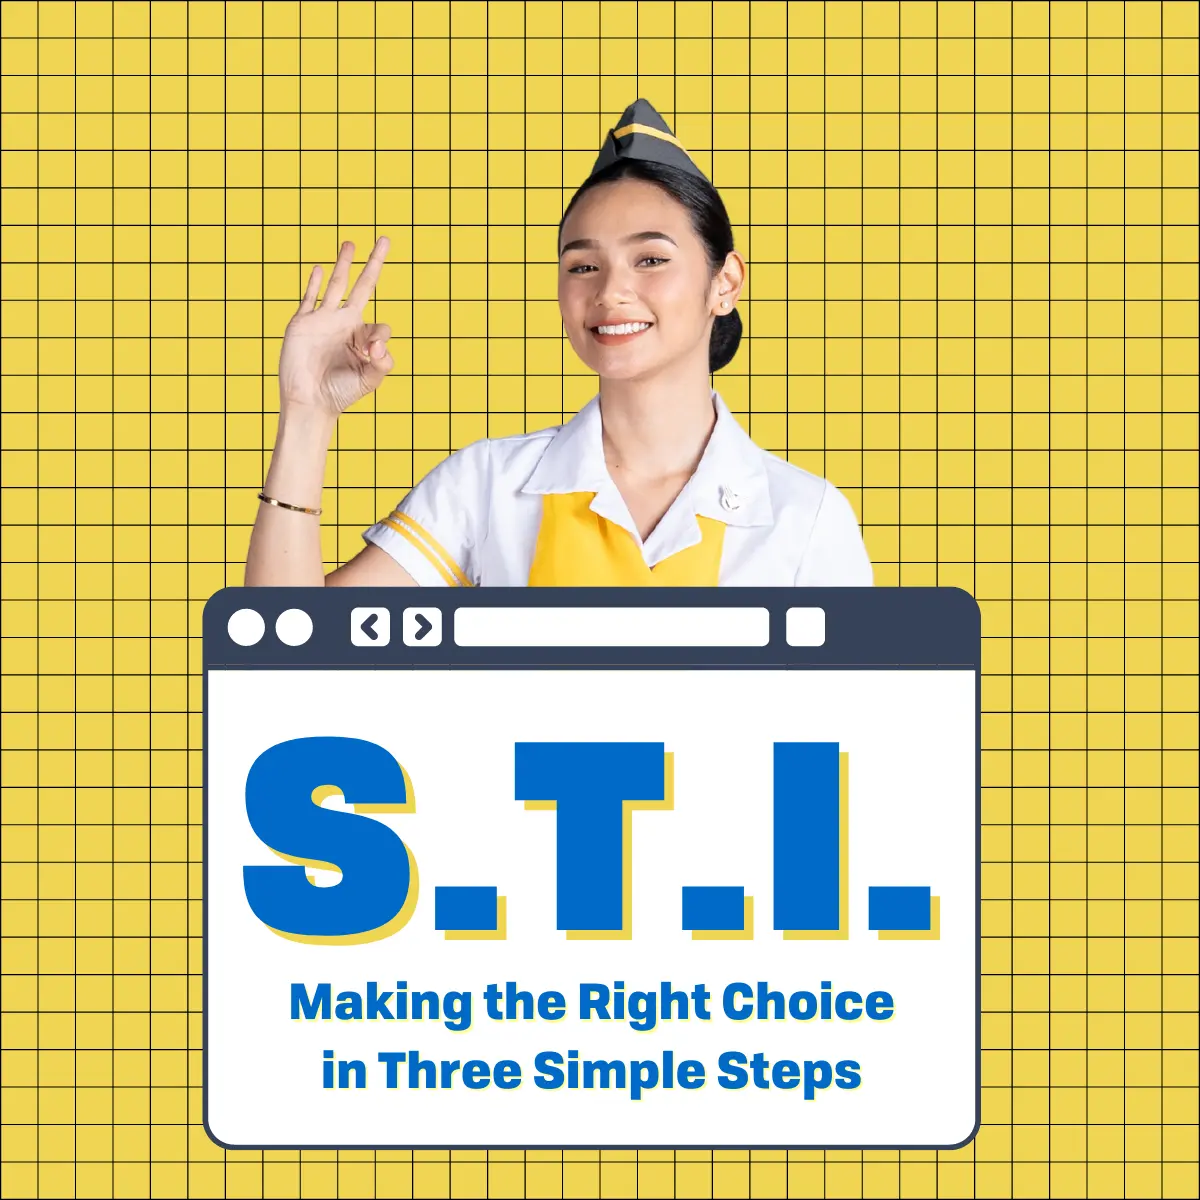 Making the Right Choice in Three Simple Steps